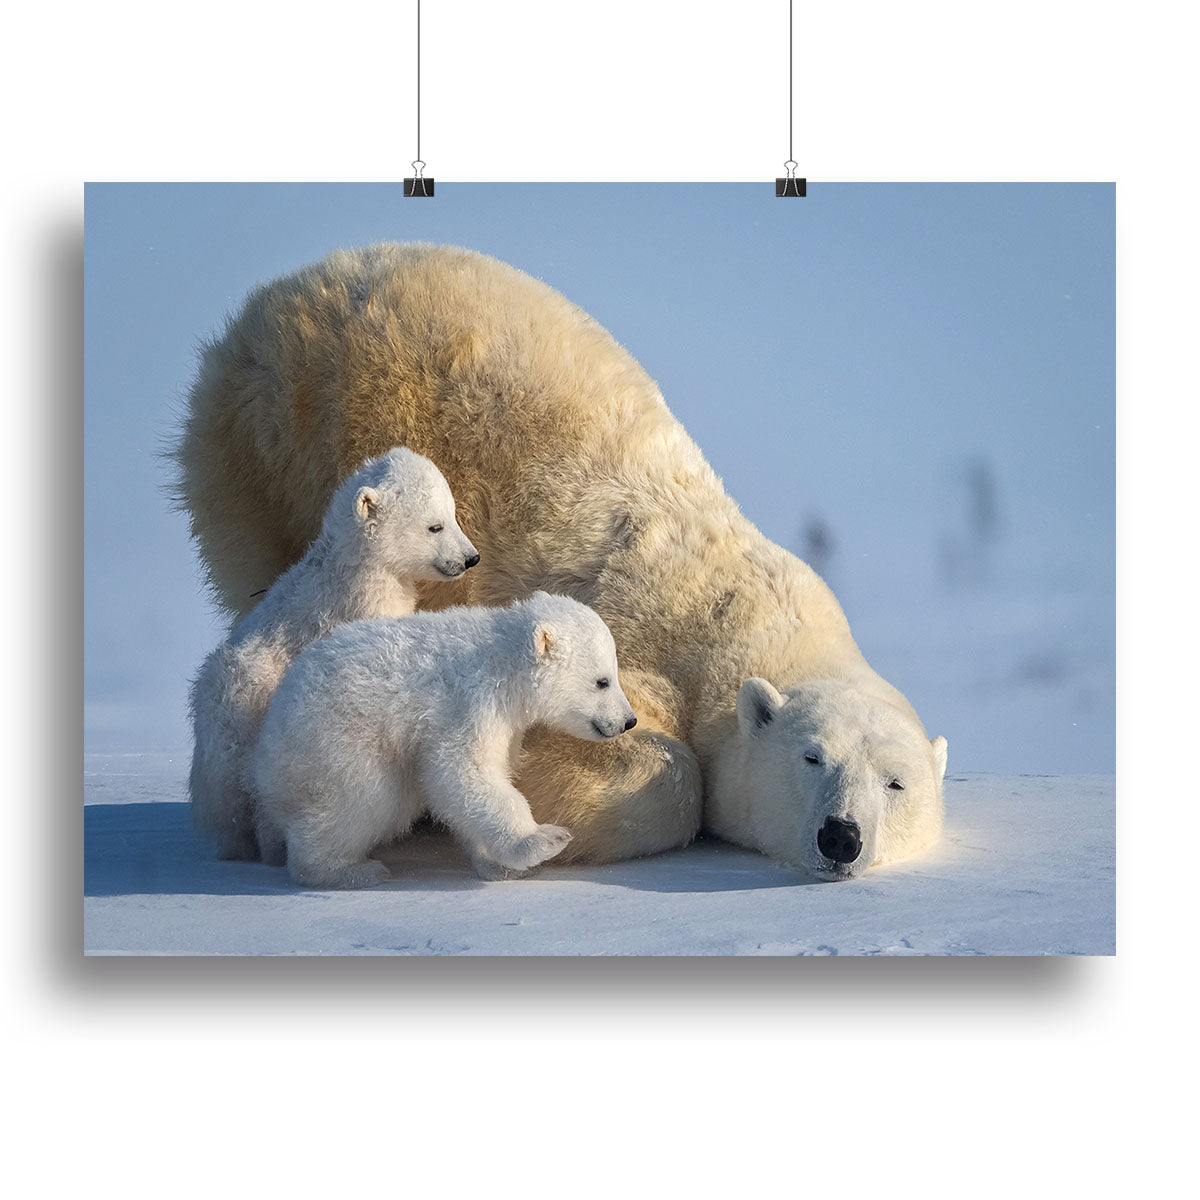 Mum Play together Canvas Print or Poster - 1x - 2